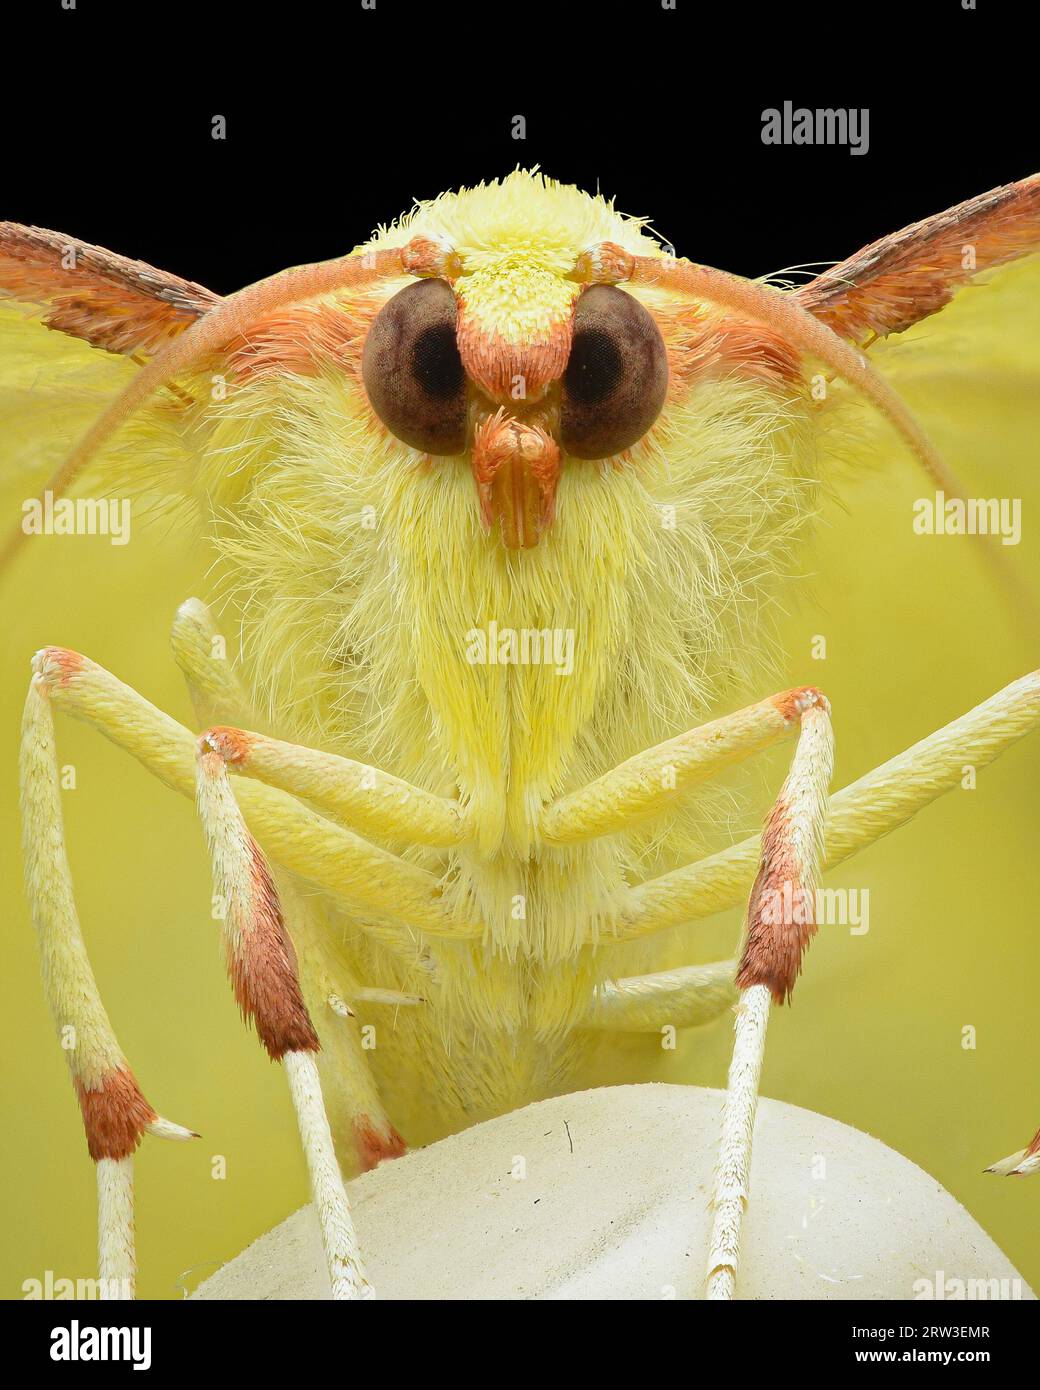 Symmetrical portrait of a yellow and brown Brimstone Moth, on a white eraser-tip pencil, black background (Opisthograptis luteolata) Stock Photo